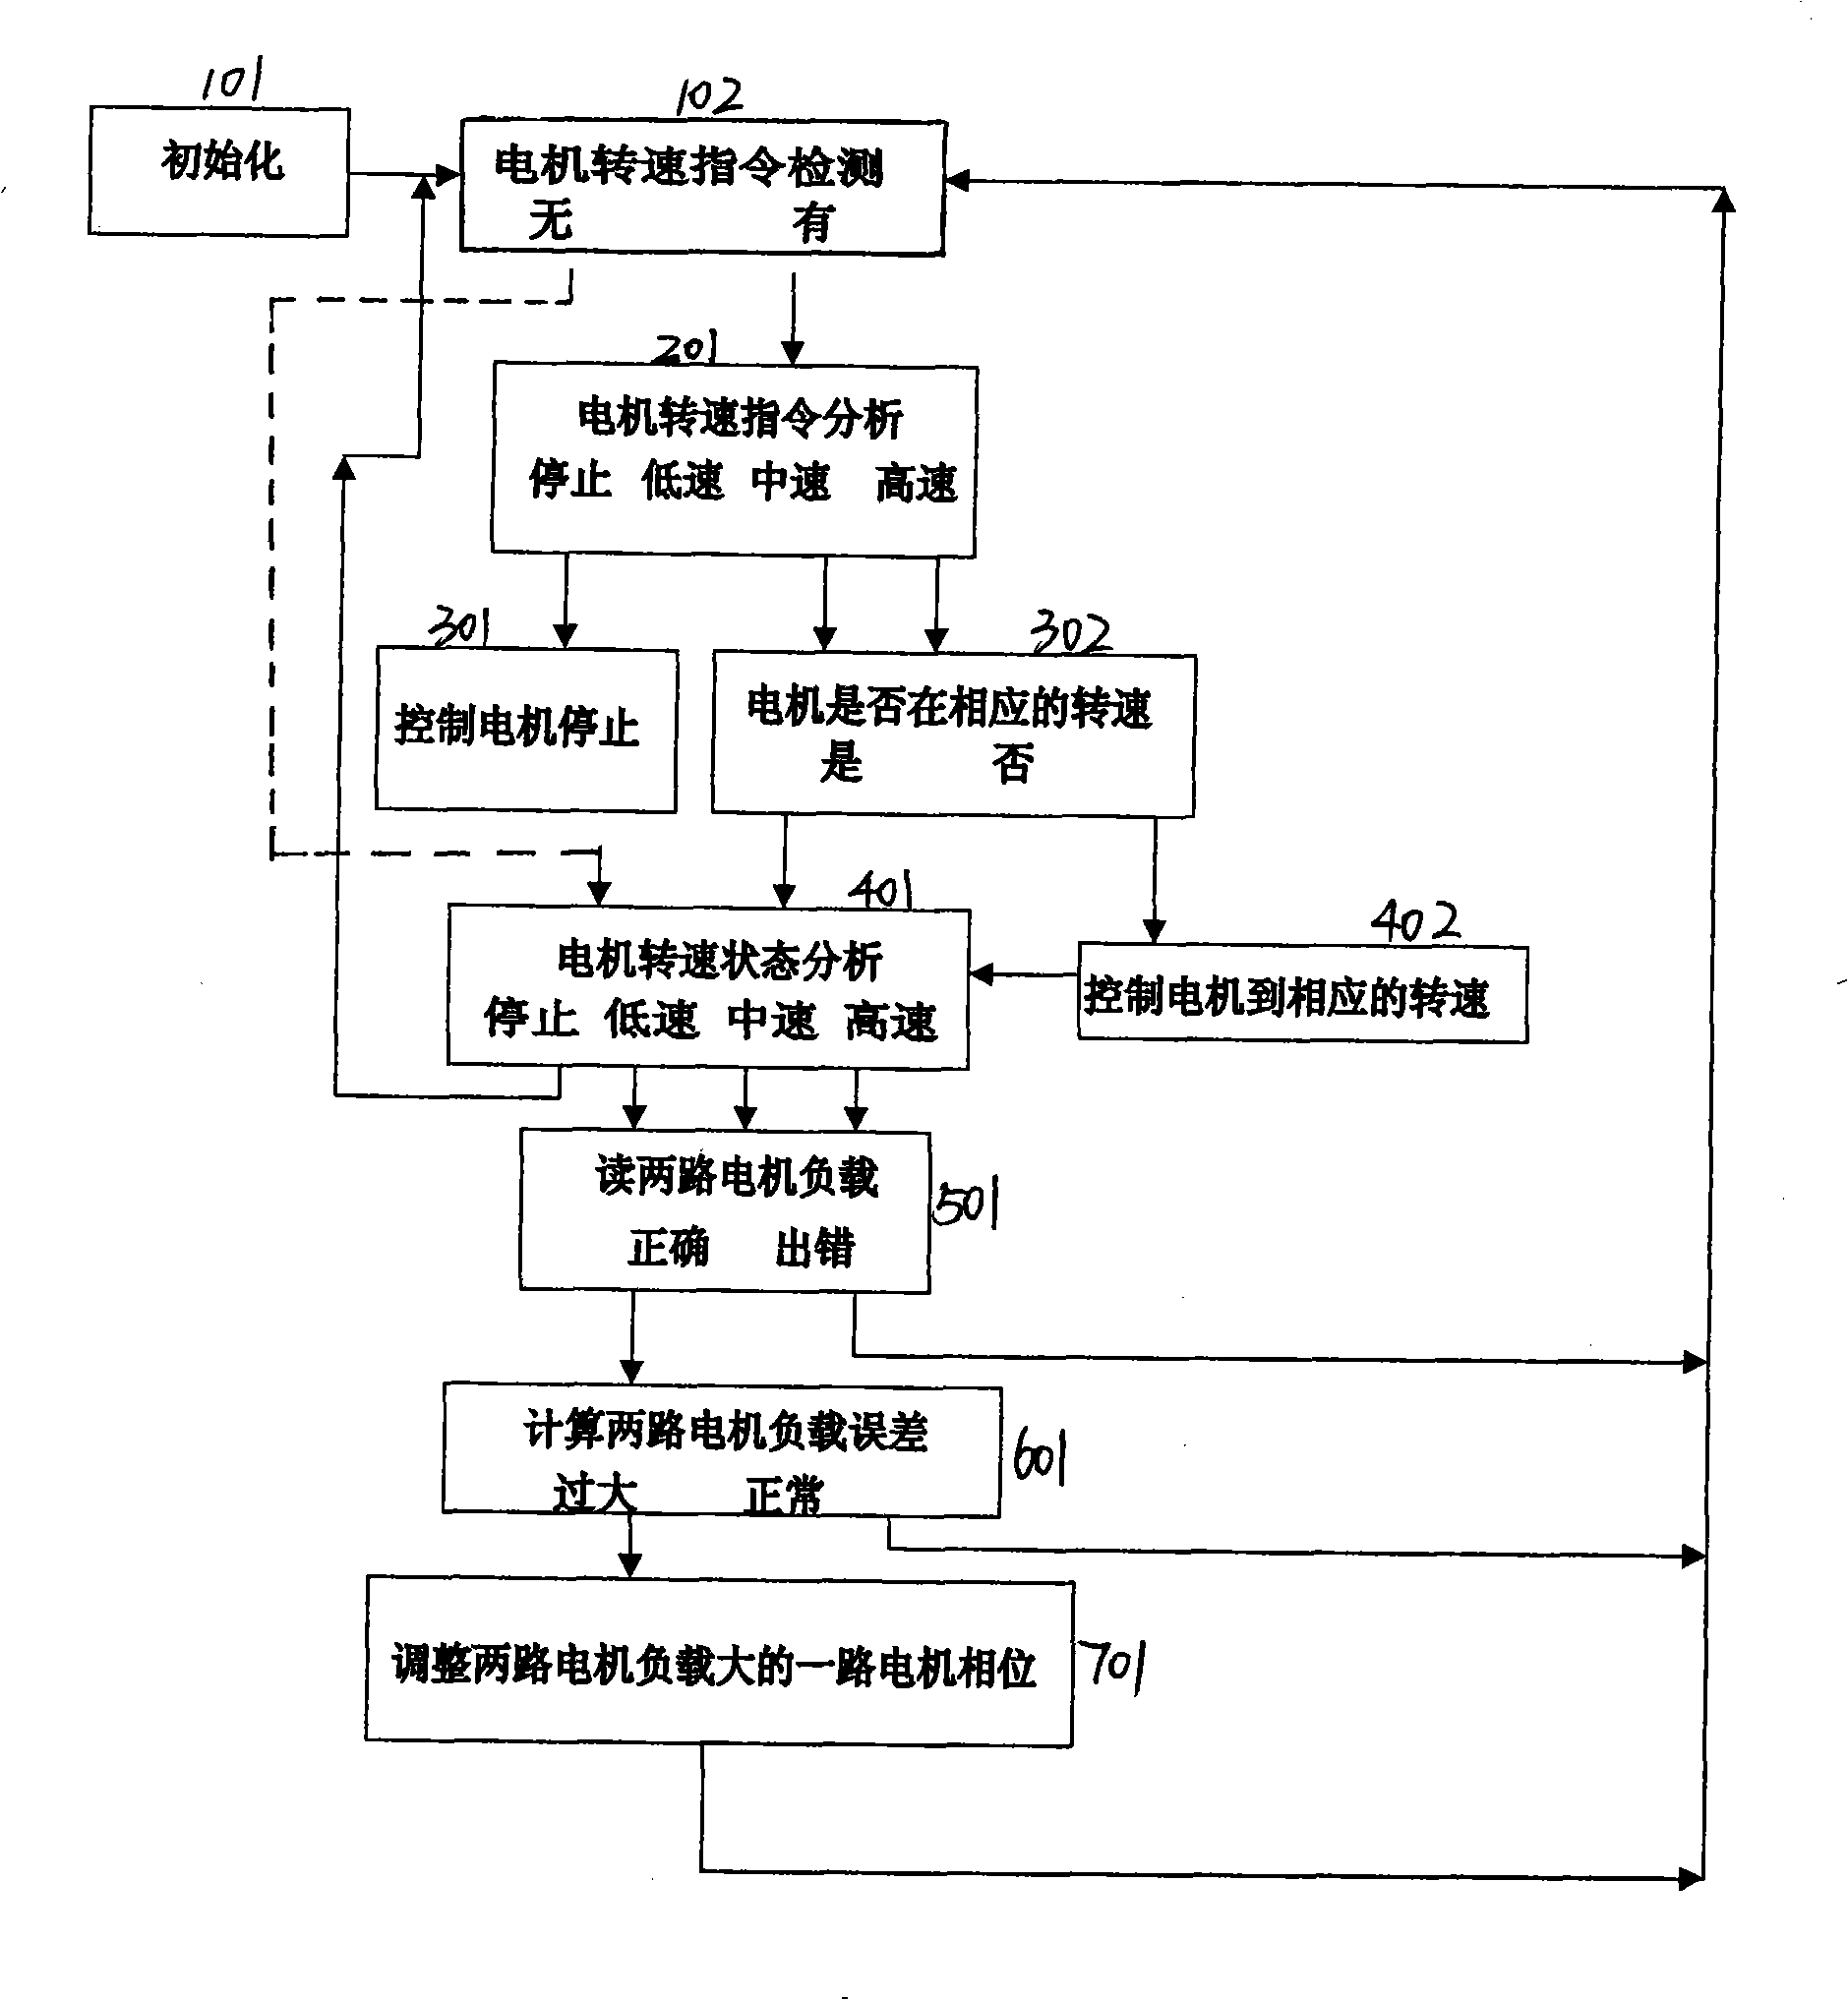 Motor synchronous control system of sponge cutting machine